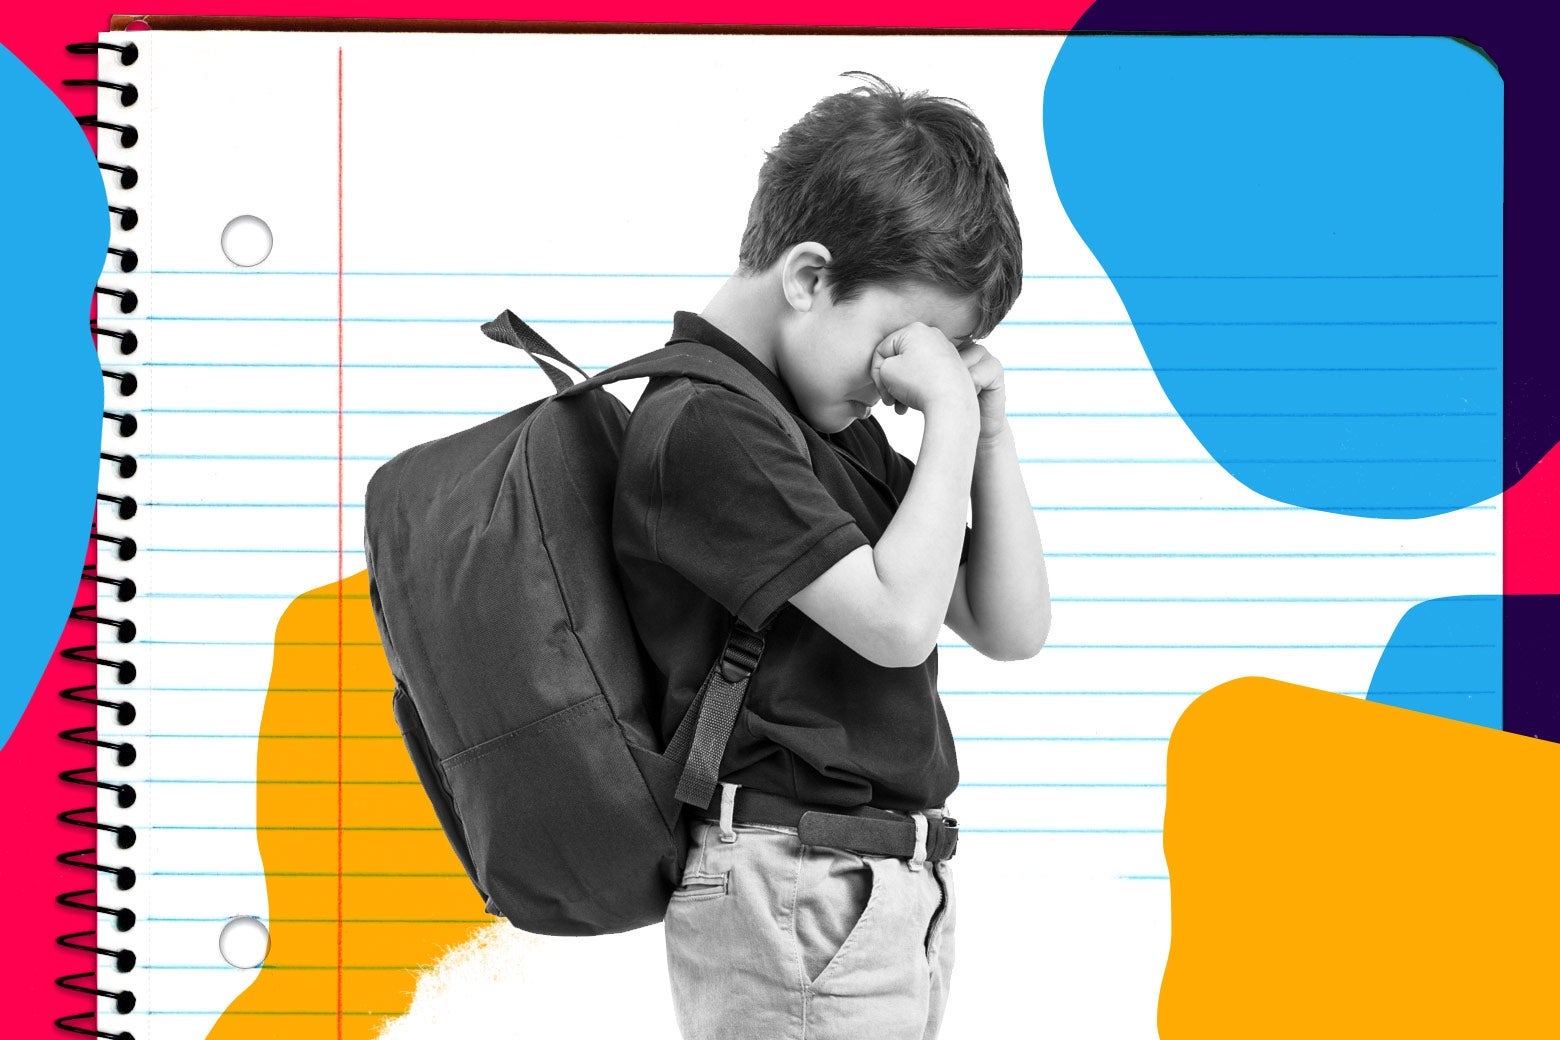 A small boy cries while wearing a backpack.